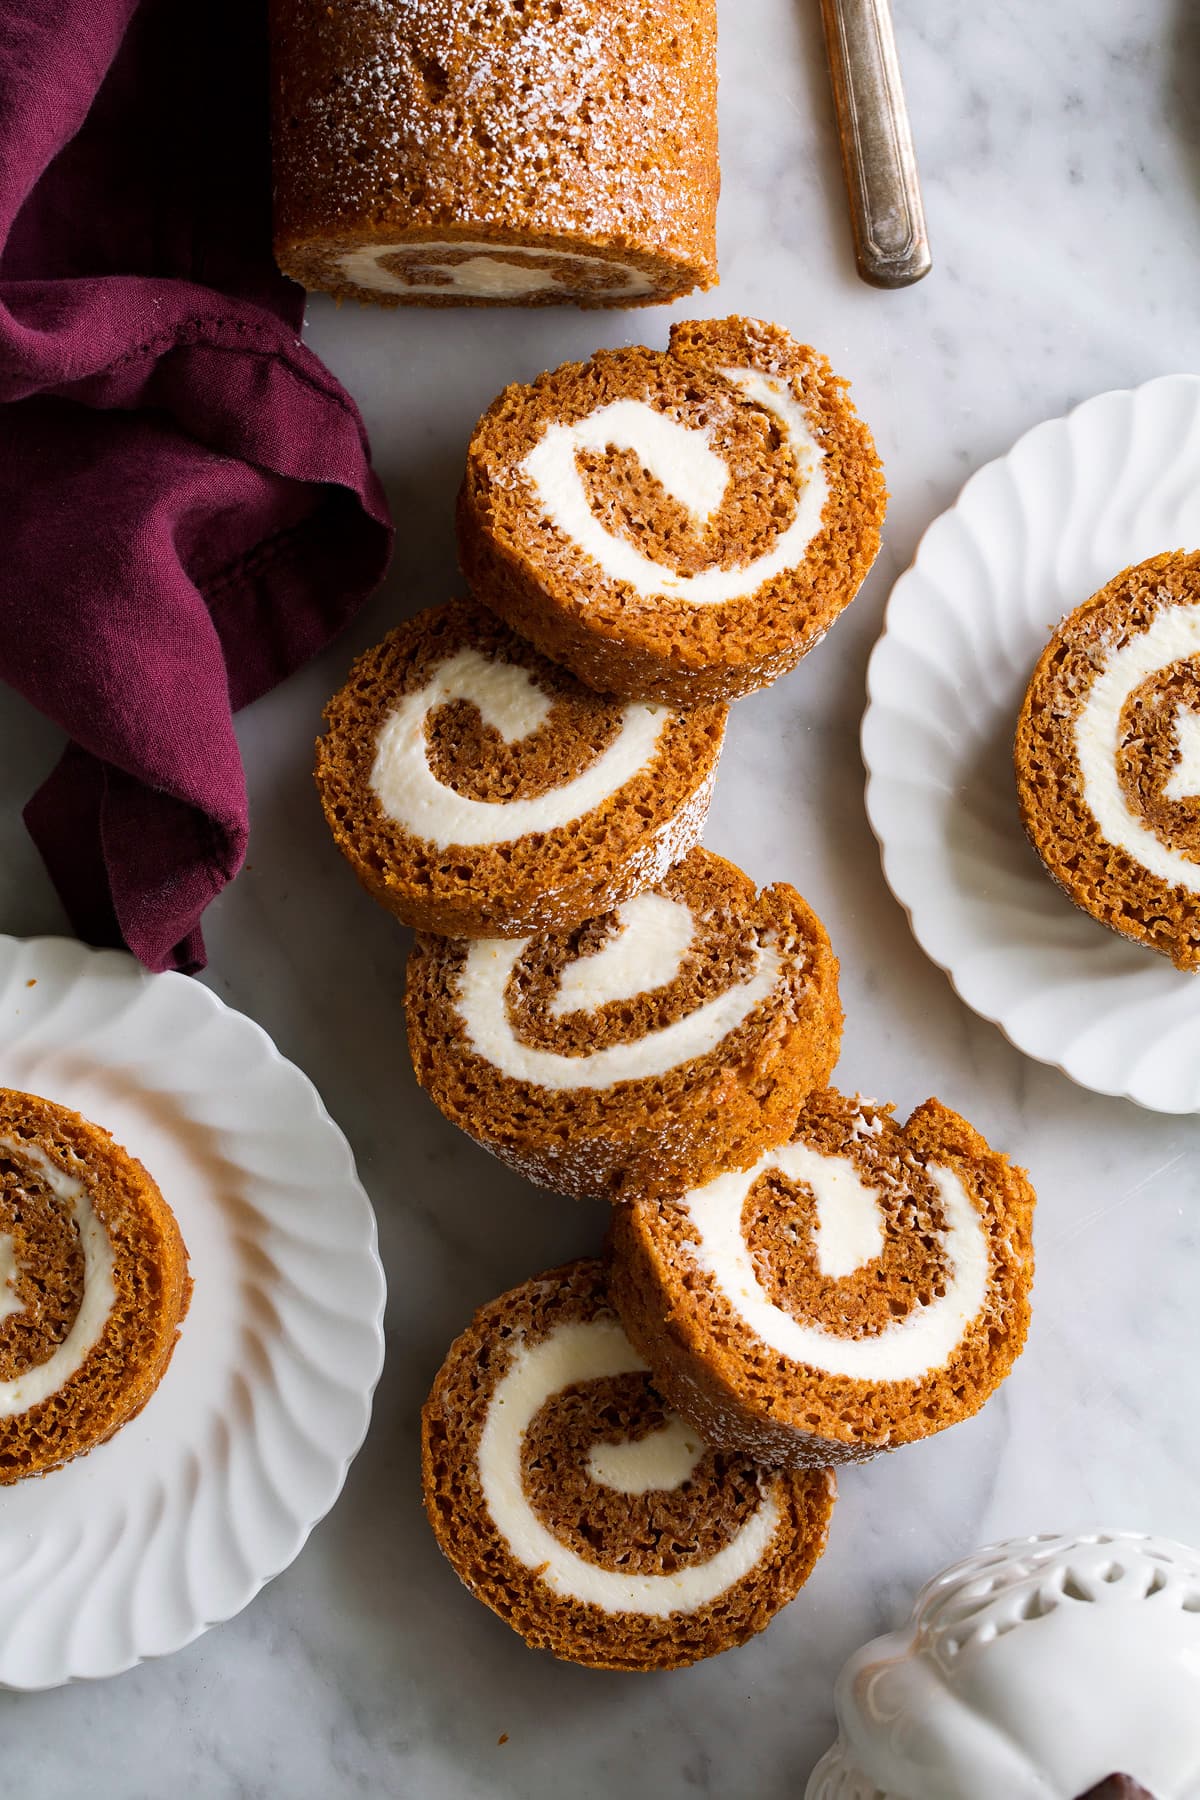 Sliced pumpkin roll on a marble surface.